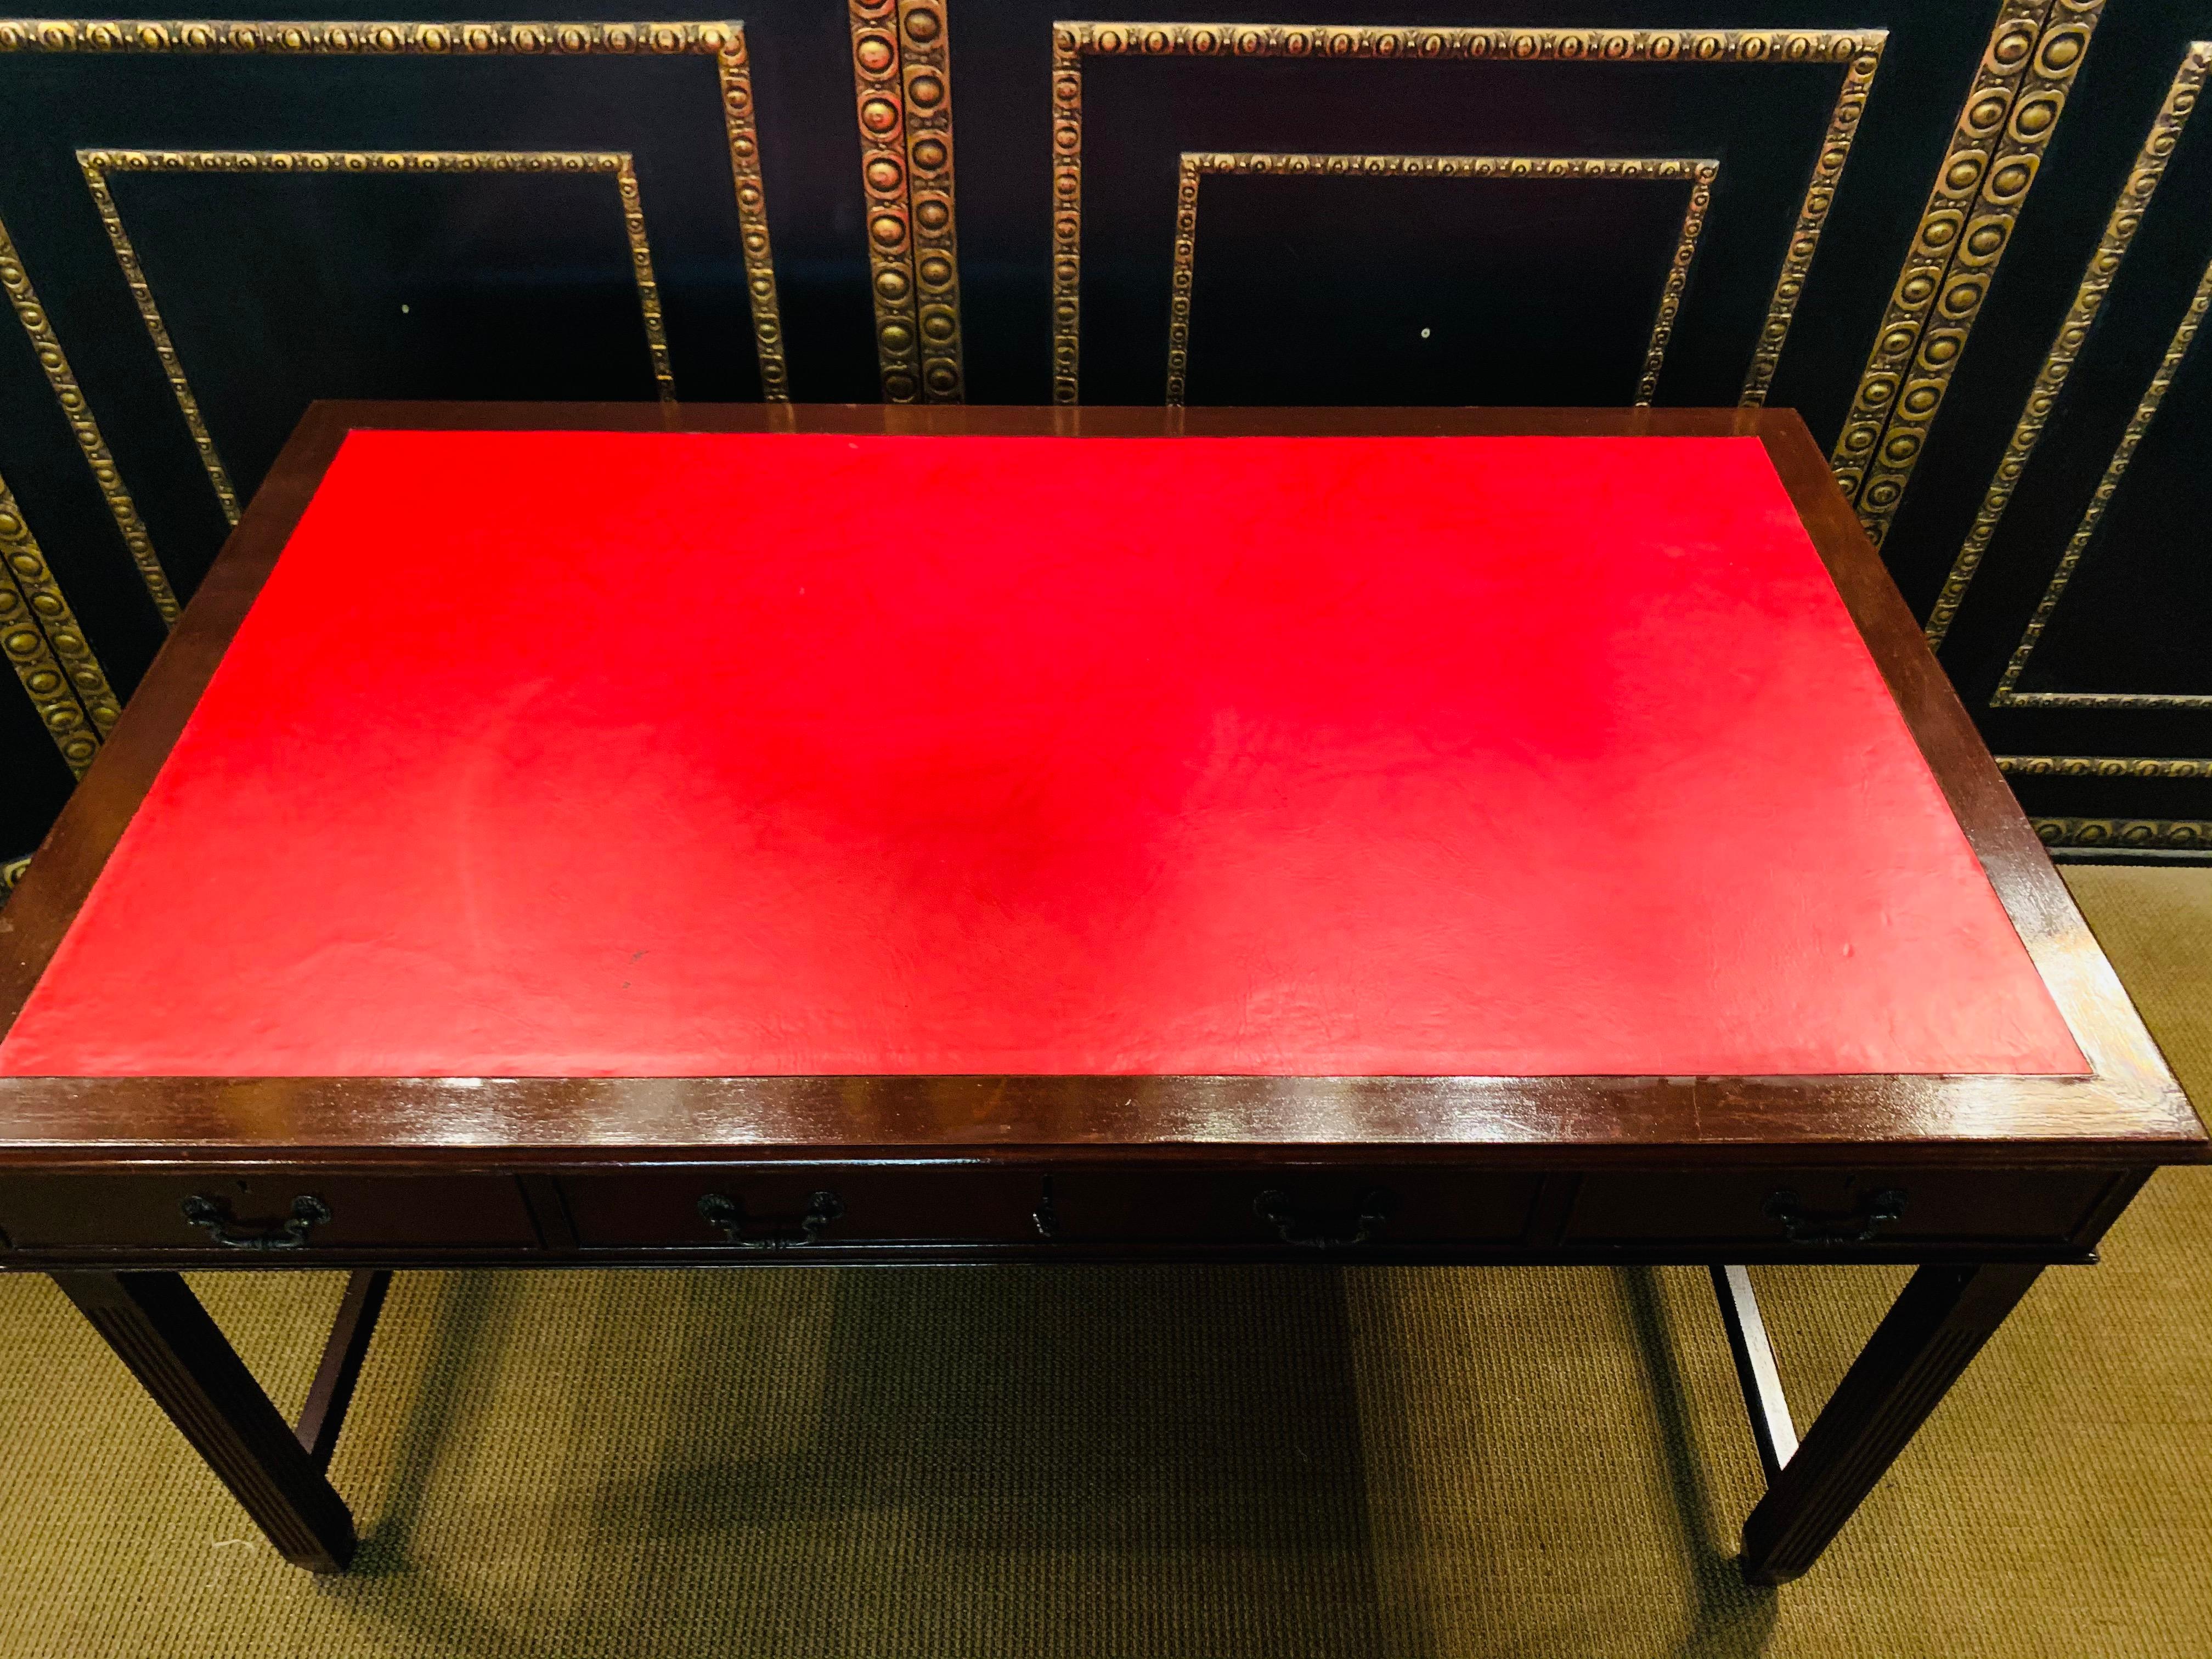 Beautiful extraordinary English desk with 3 drawers and red leather top. The plate can still be removed, but can be fixed if desired.